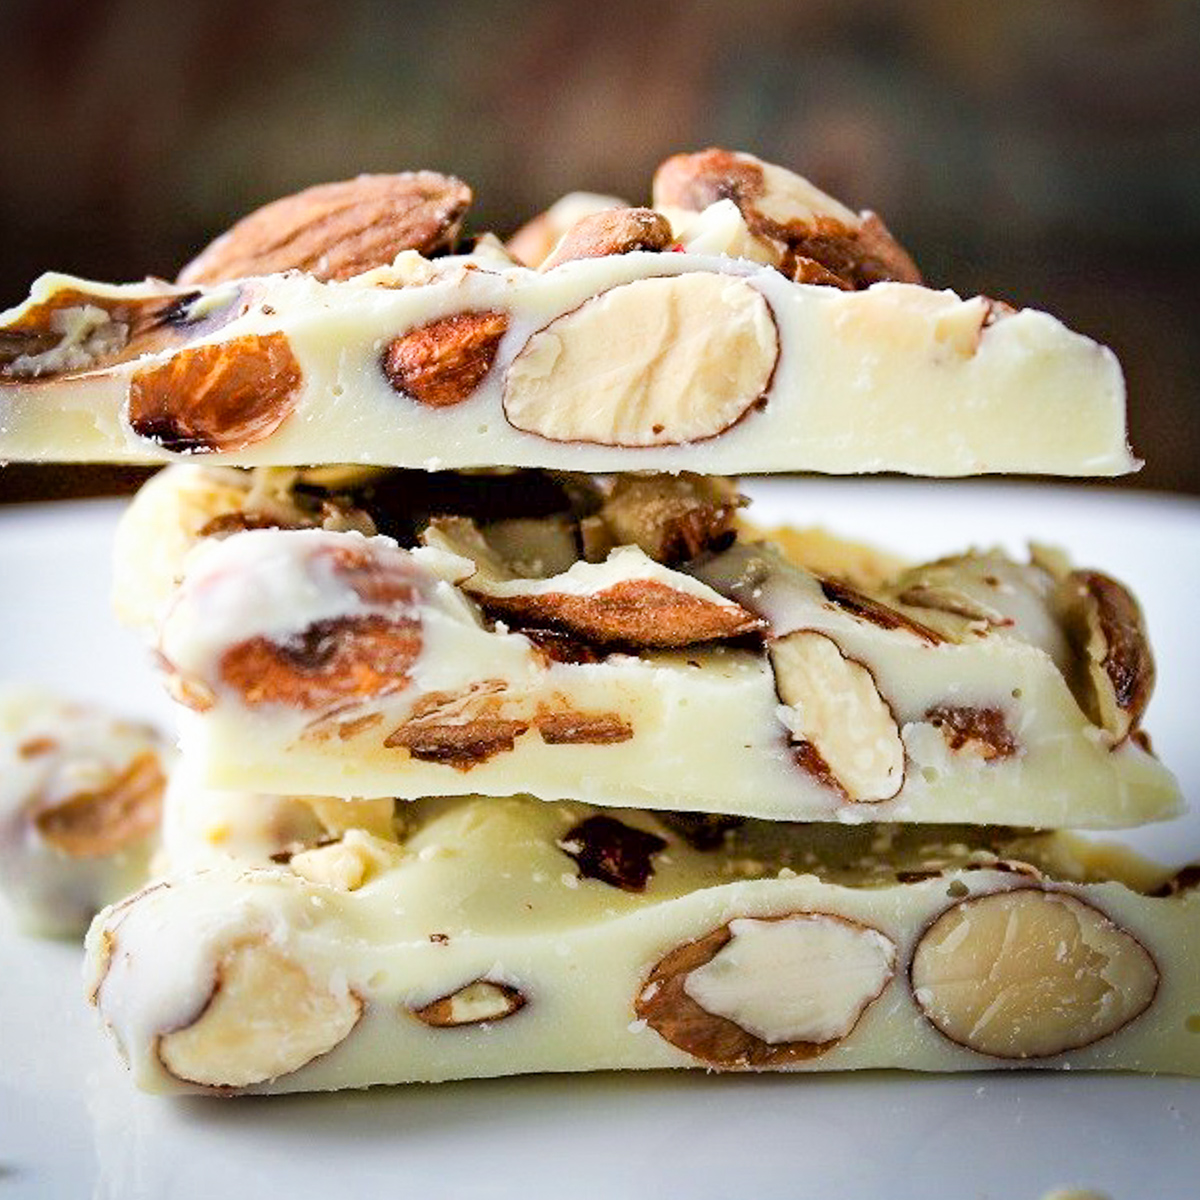 white chocolate bark with almonds on plate 1